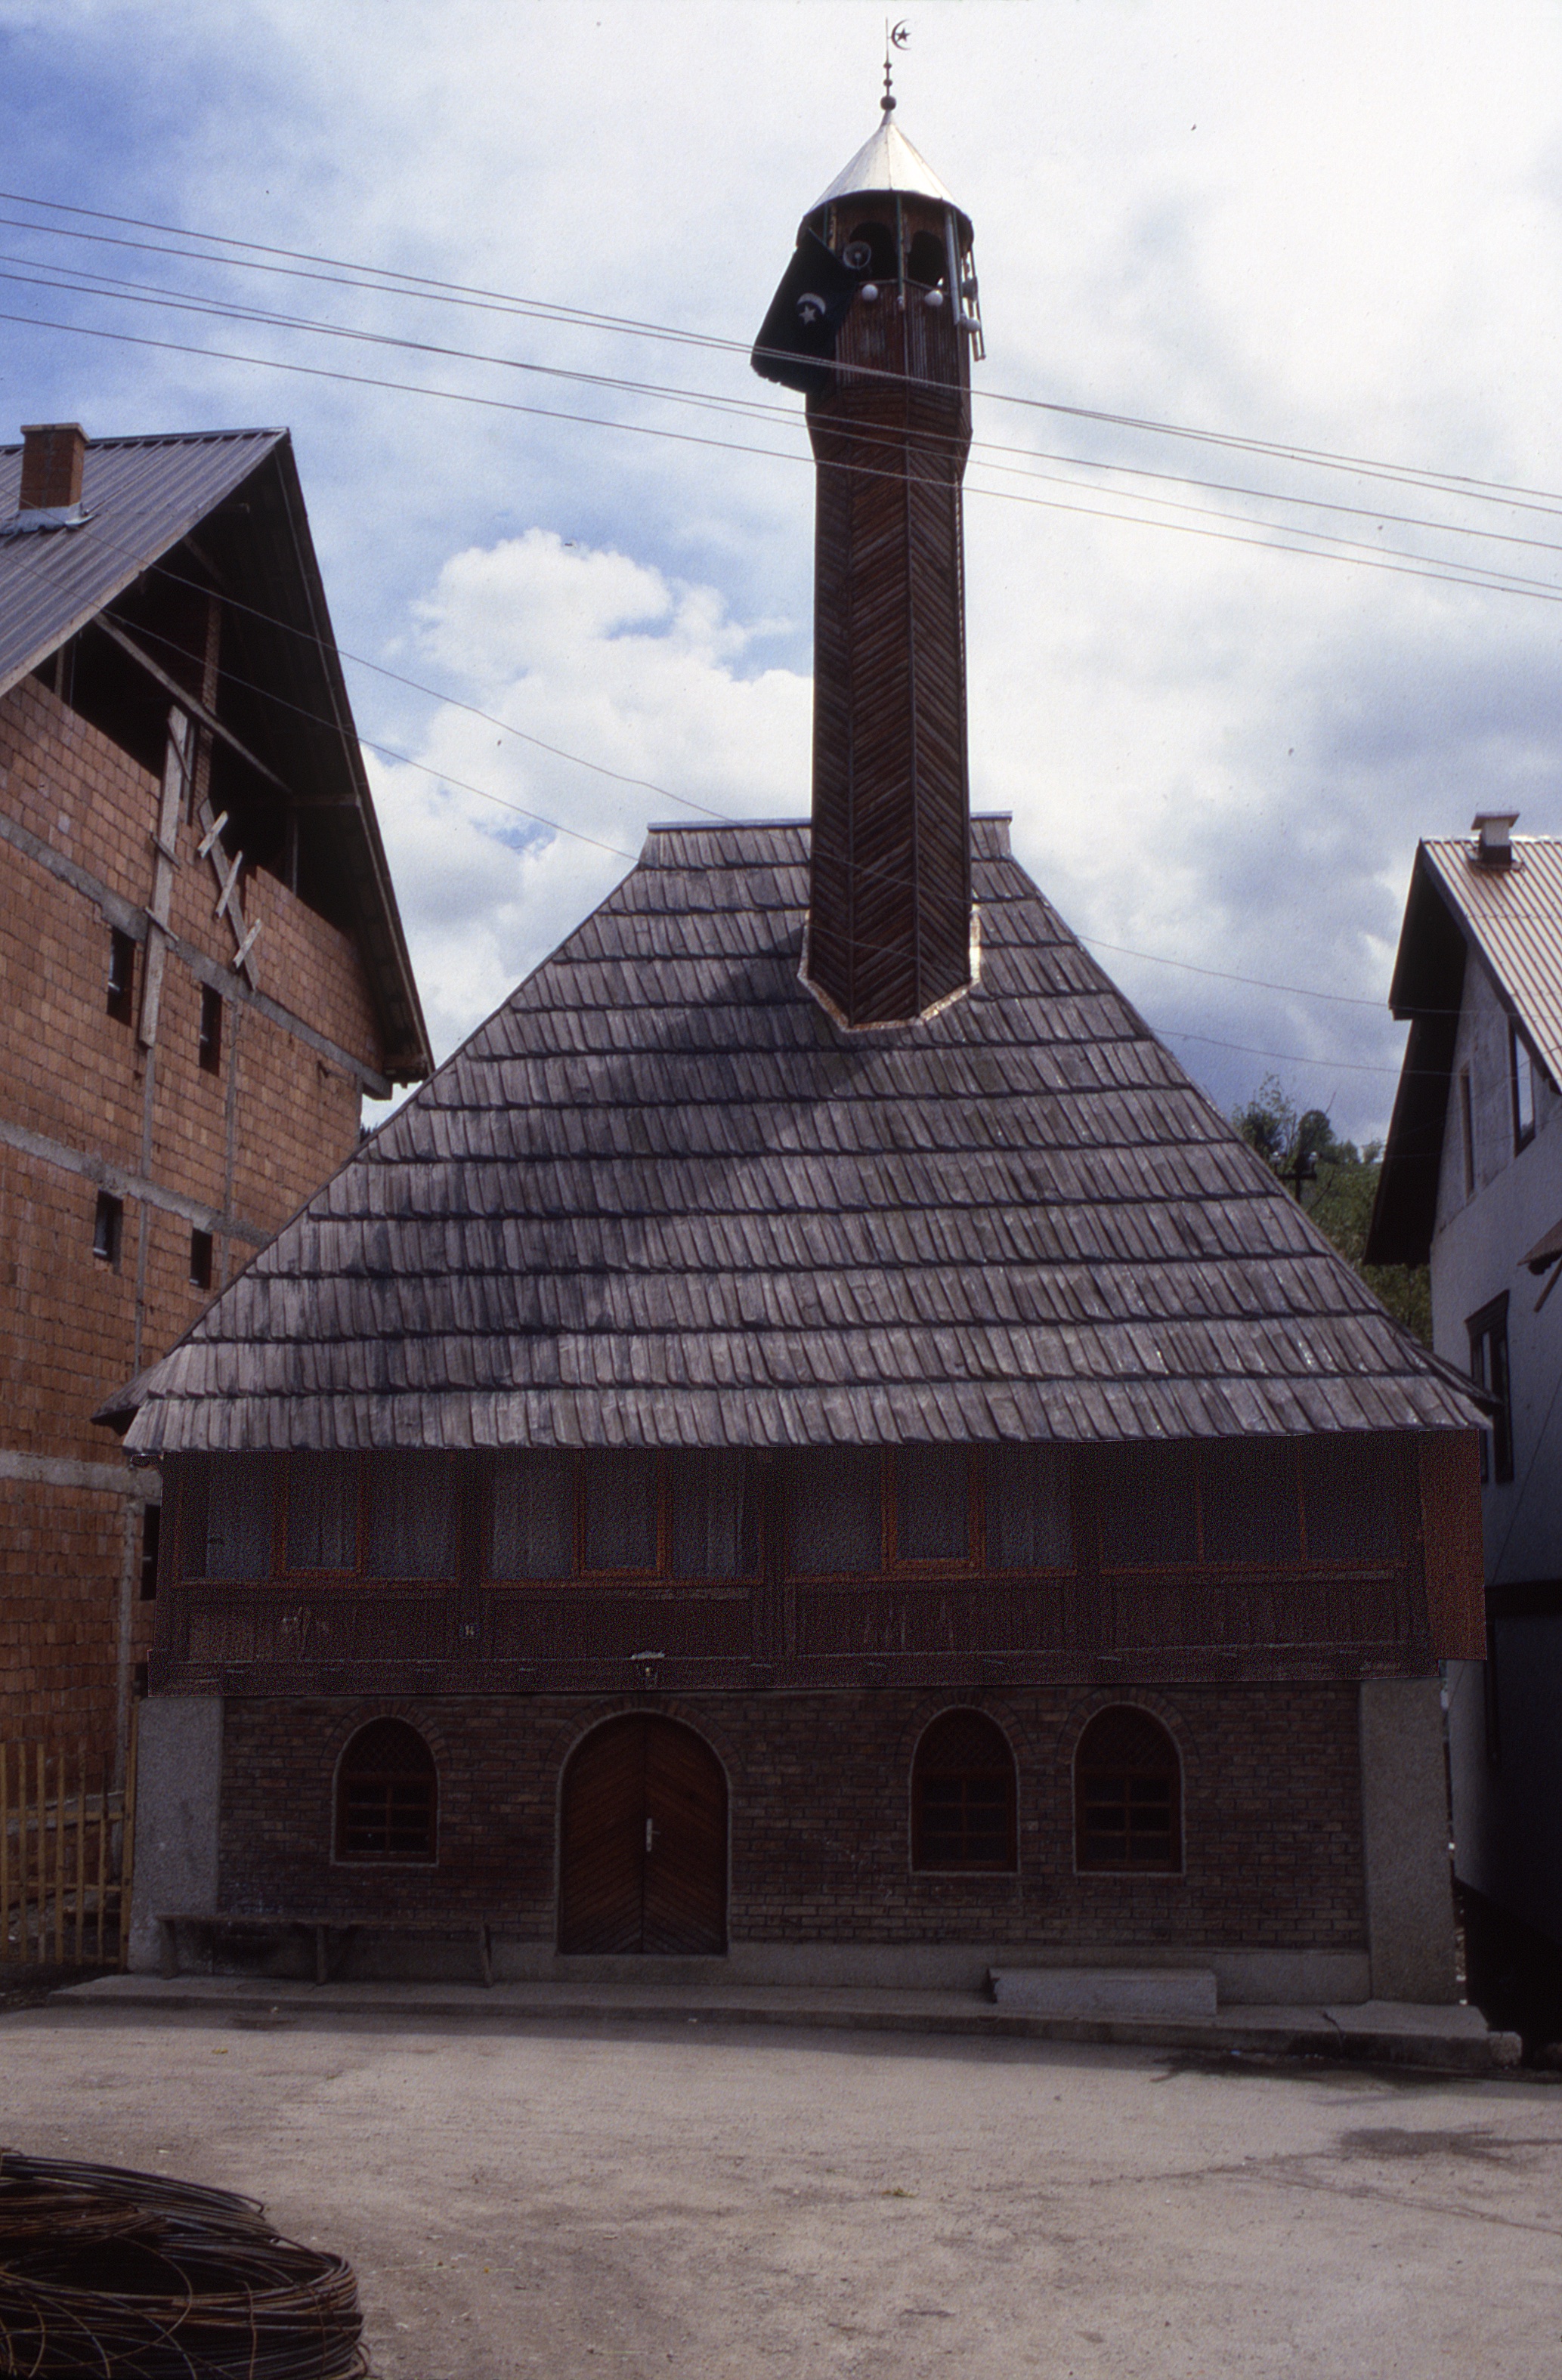 <p>The Kučanska džamija was constructed near the end of the 18th century. The structure has a masonry base and a timber gallery, roof, and minaret of wood. The wood is recorded as being borovina (pine). The mosque has gone through a number of renovations and the open gallery enclosed with glazing.</p>